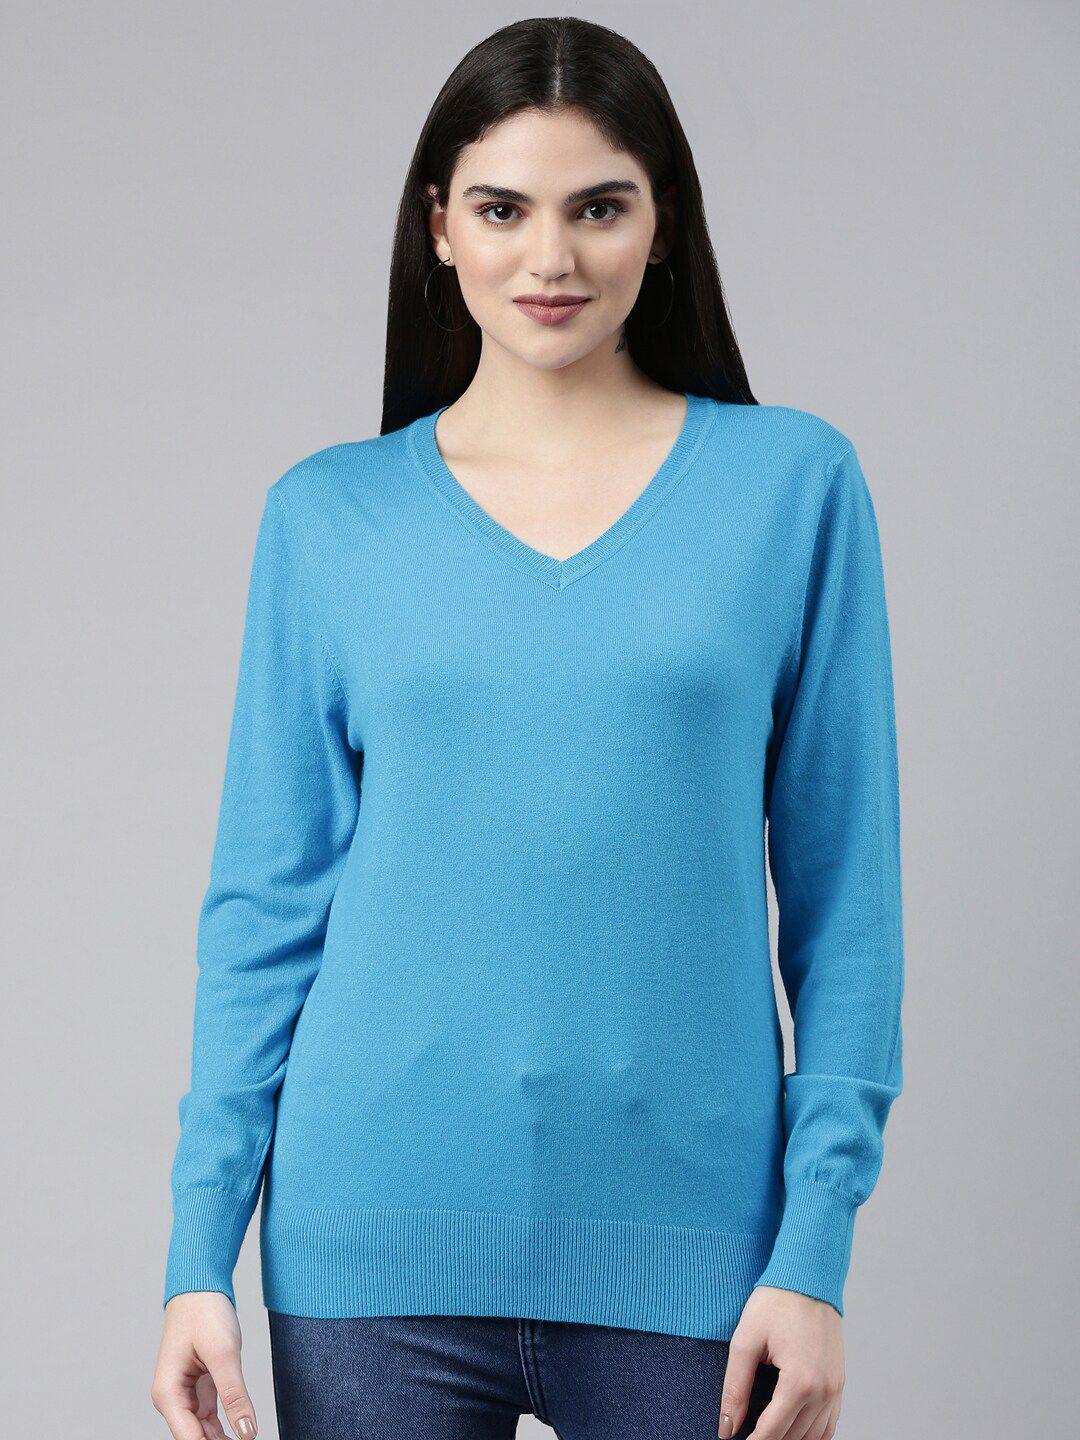 showoff v-neck fitted ribbed acrylic top